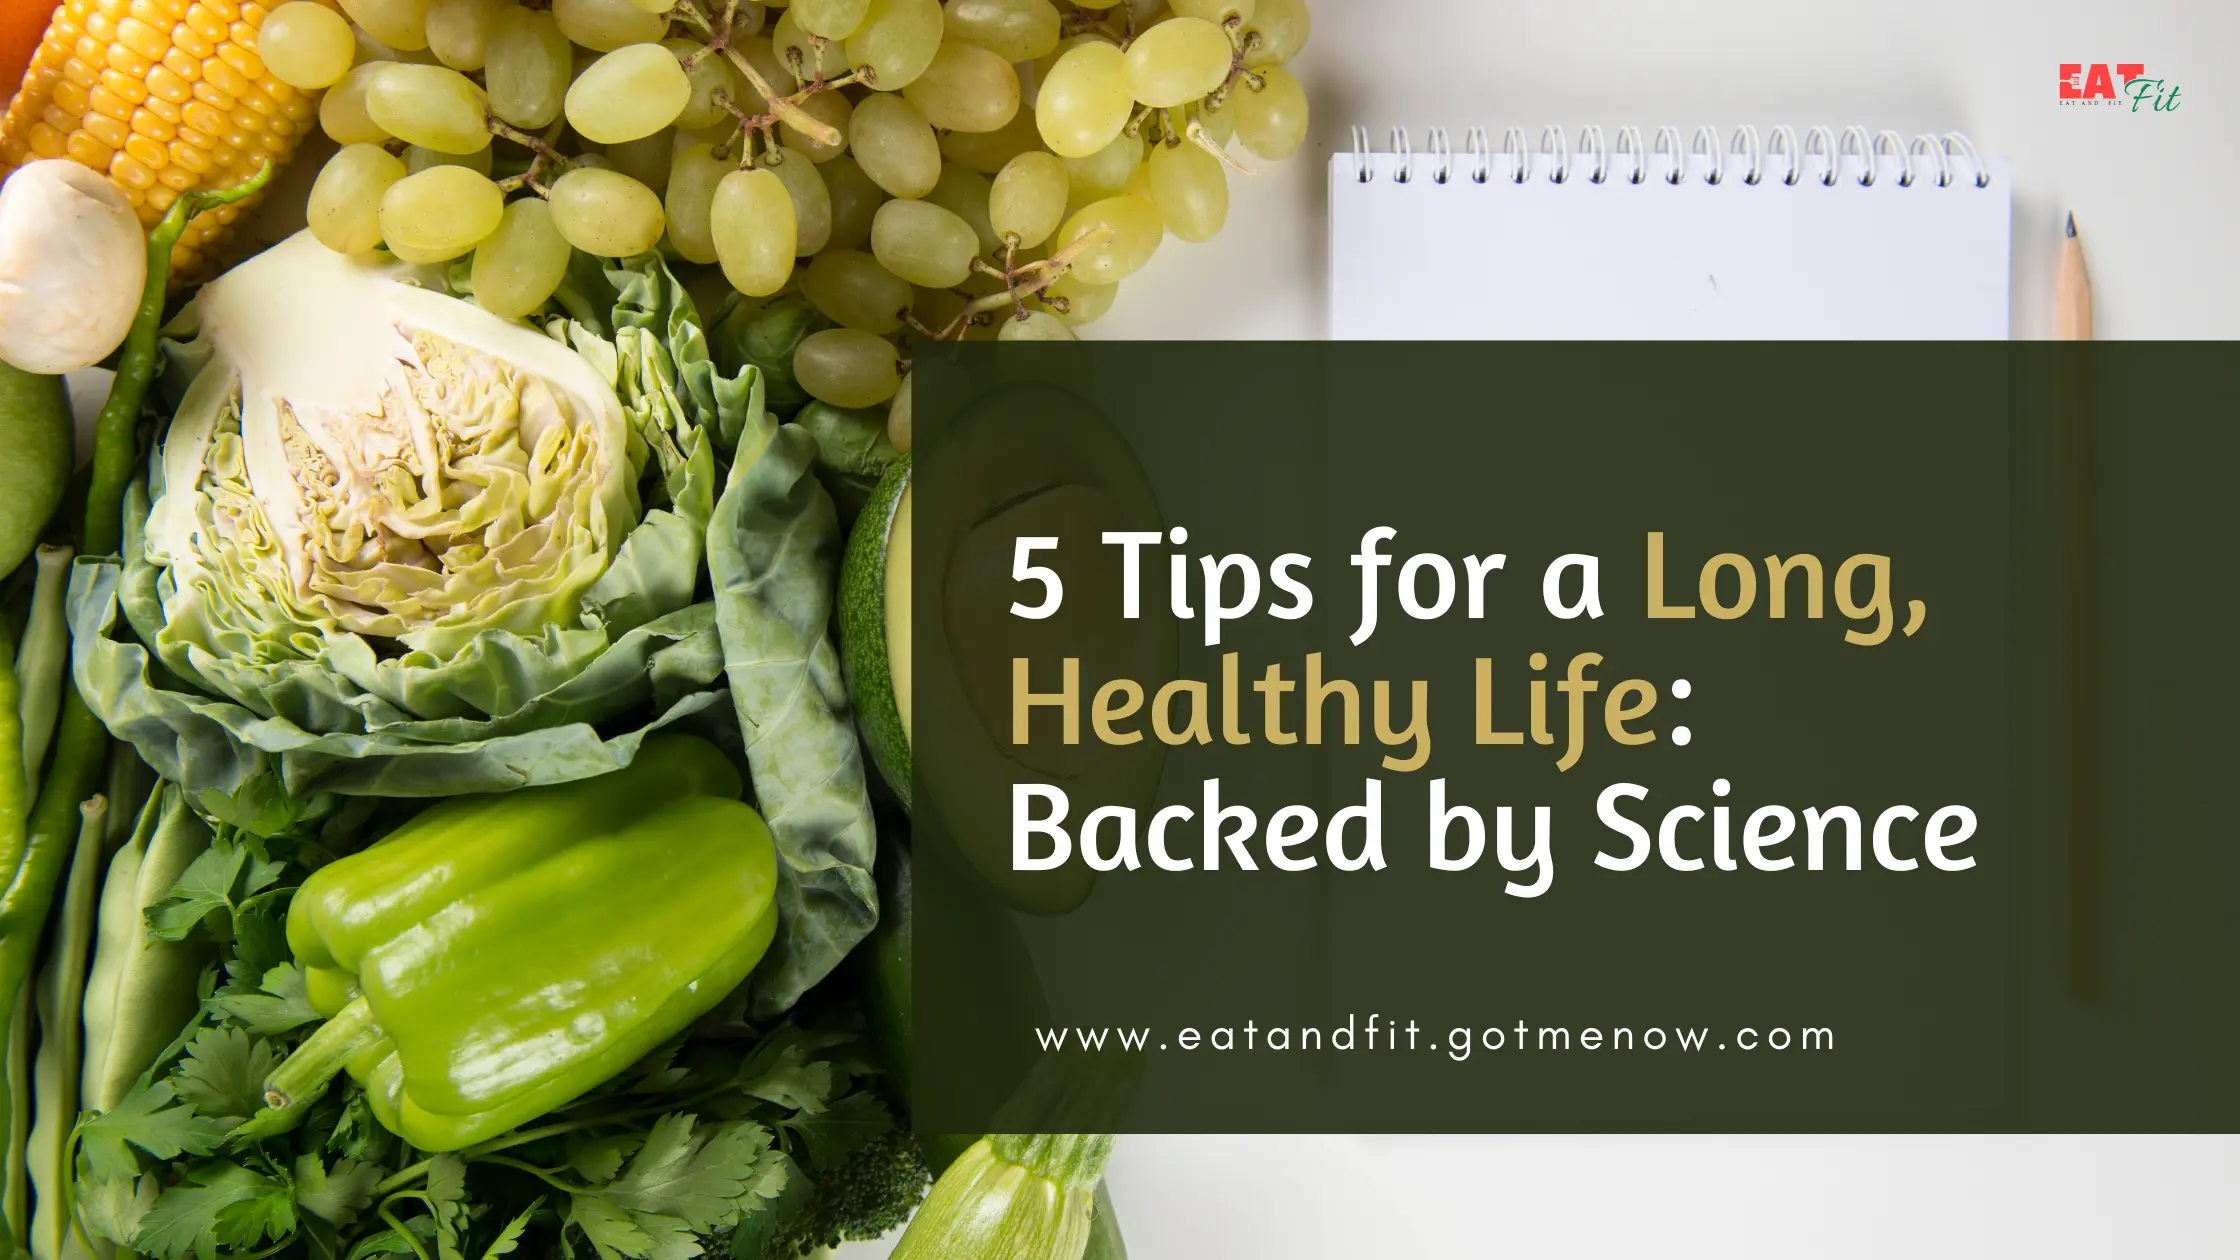 5 Scientifically-Backed Tips for Living a Long and Healthy Life